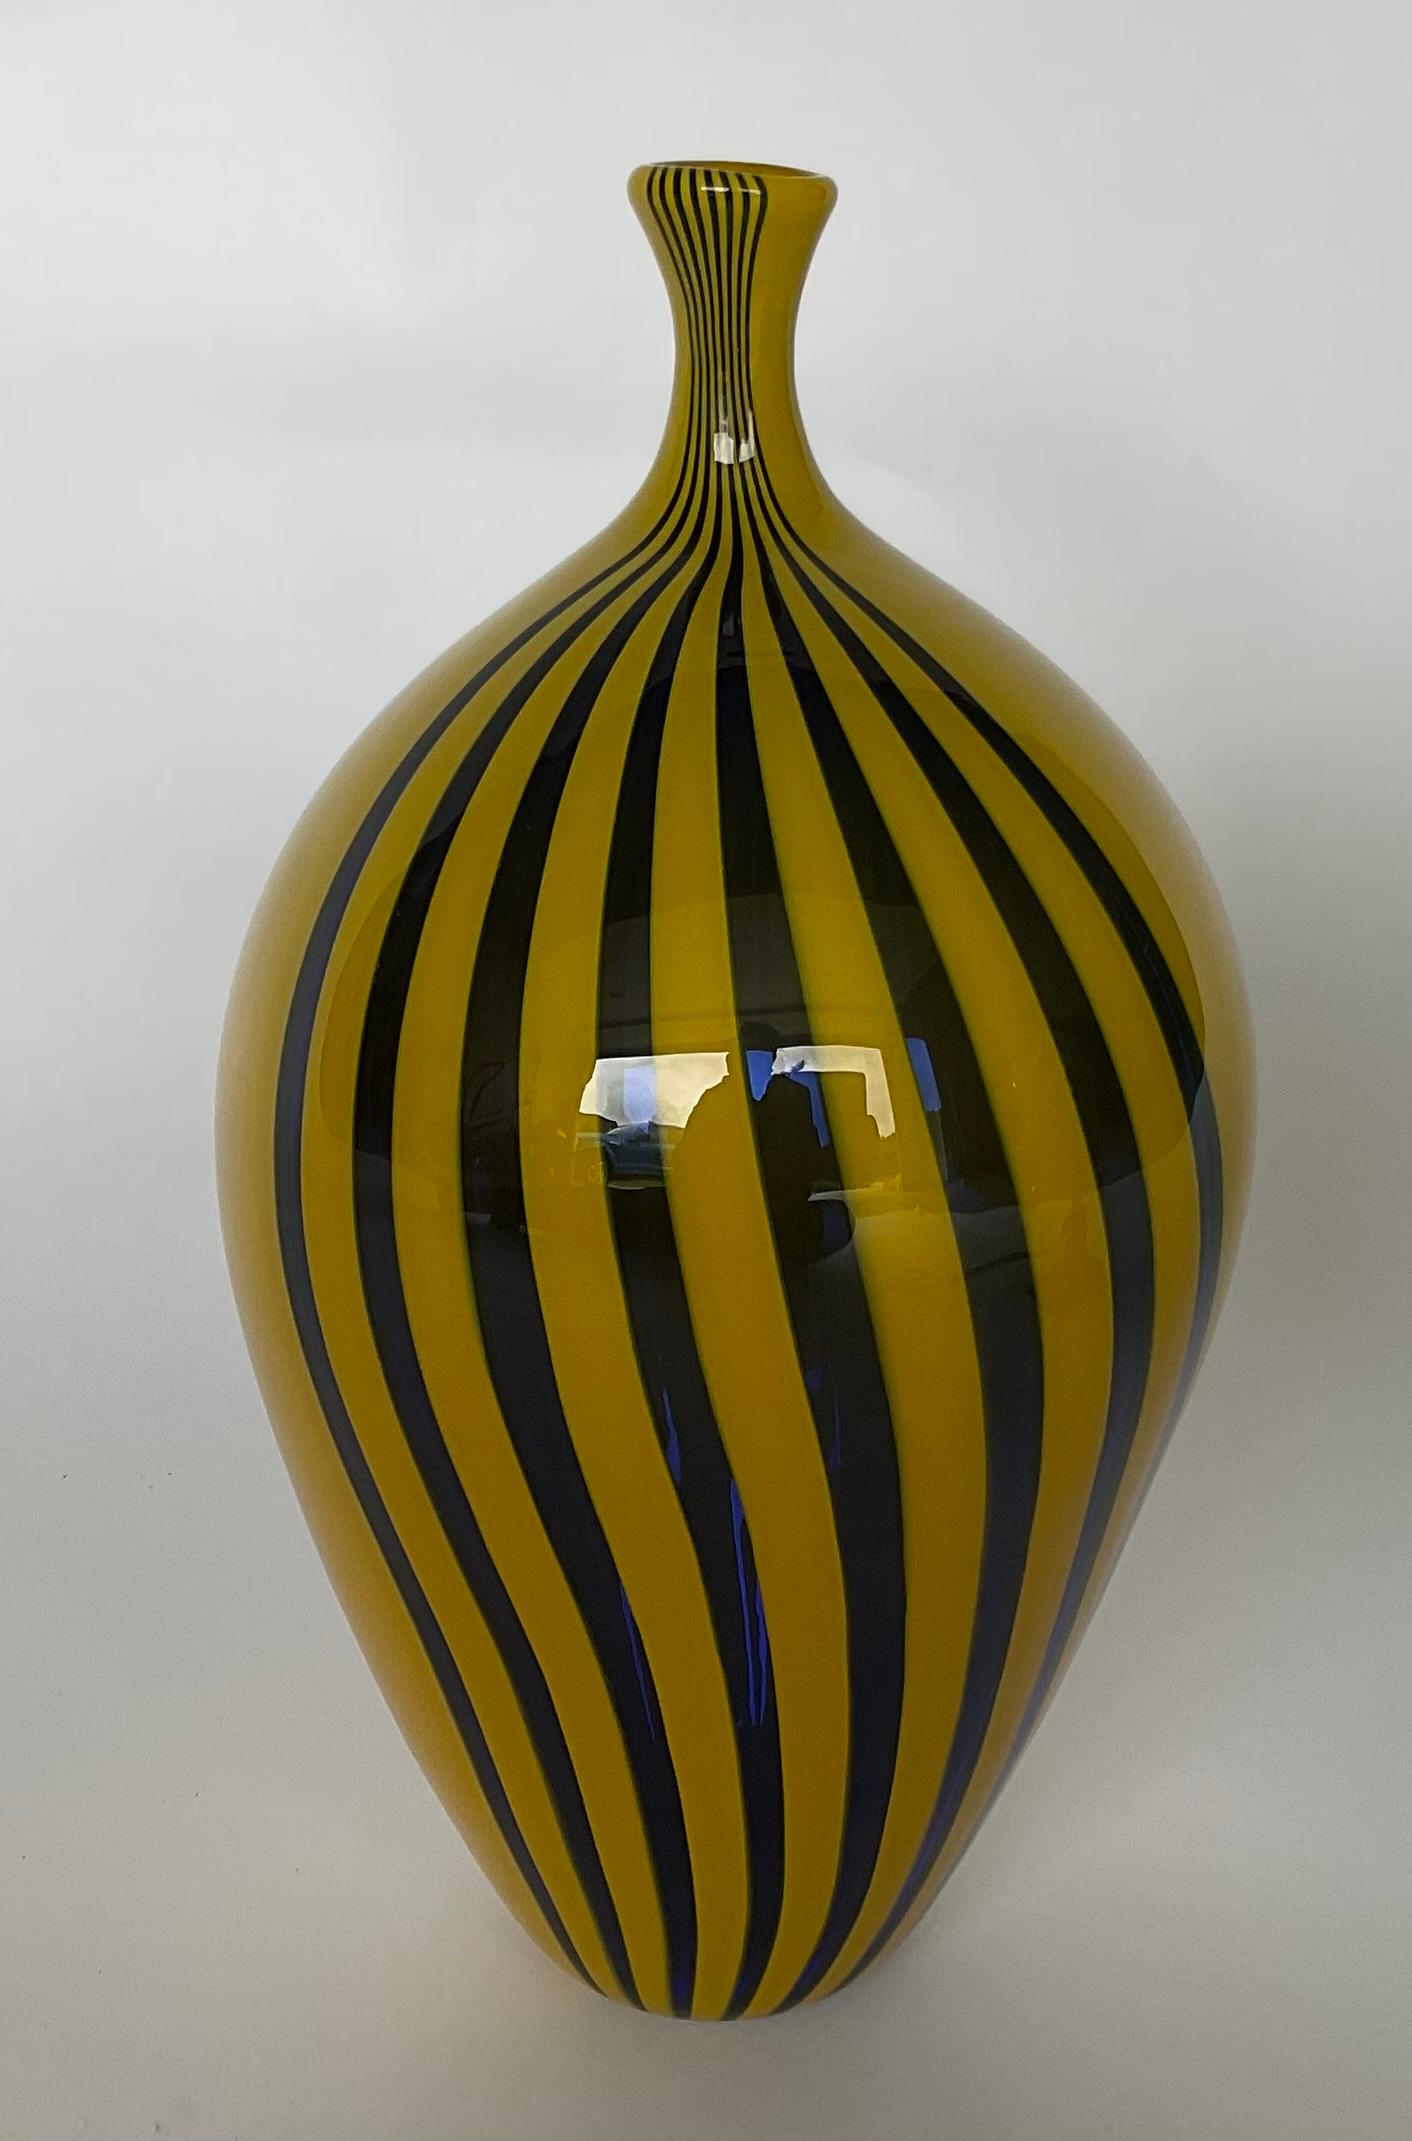 Afro Celotto Artist Signed Studio Murano Art Glass Vase in blue and yellow  For Sale 1